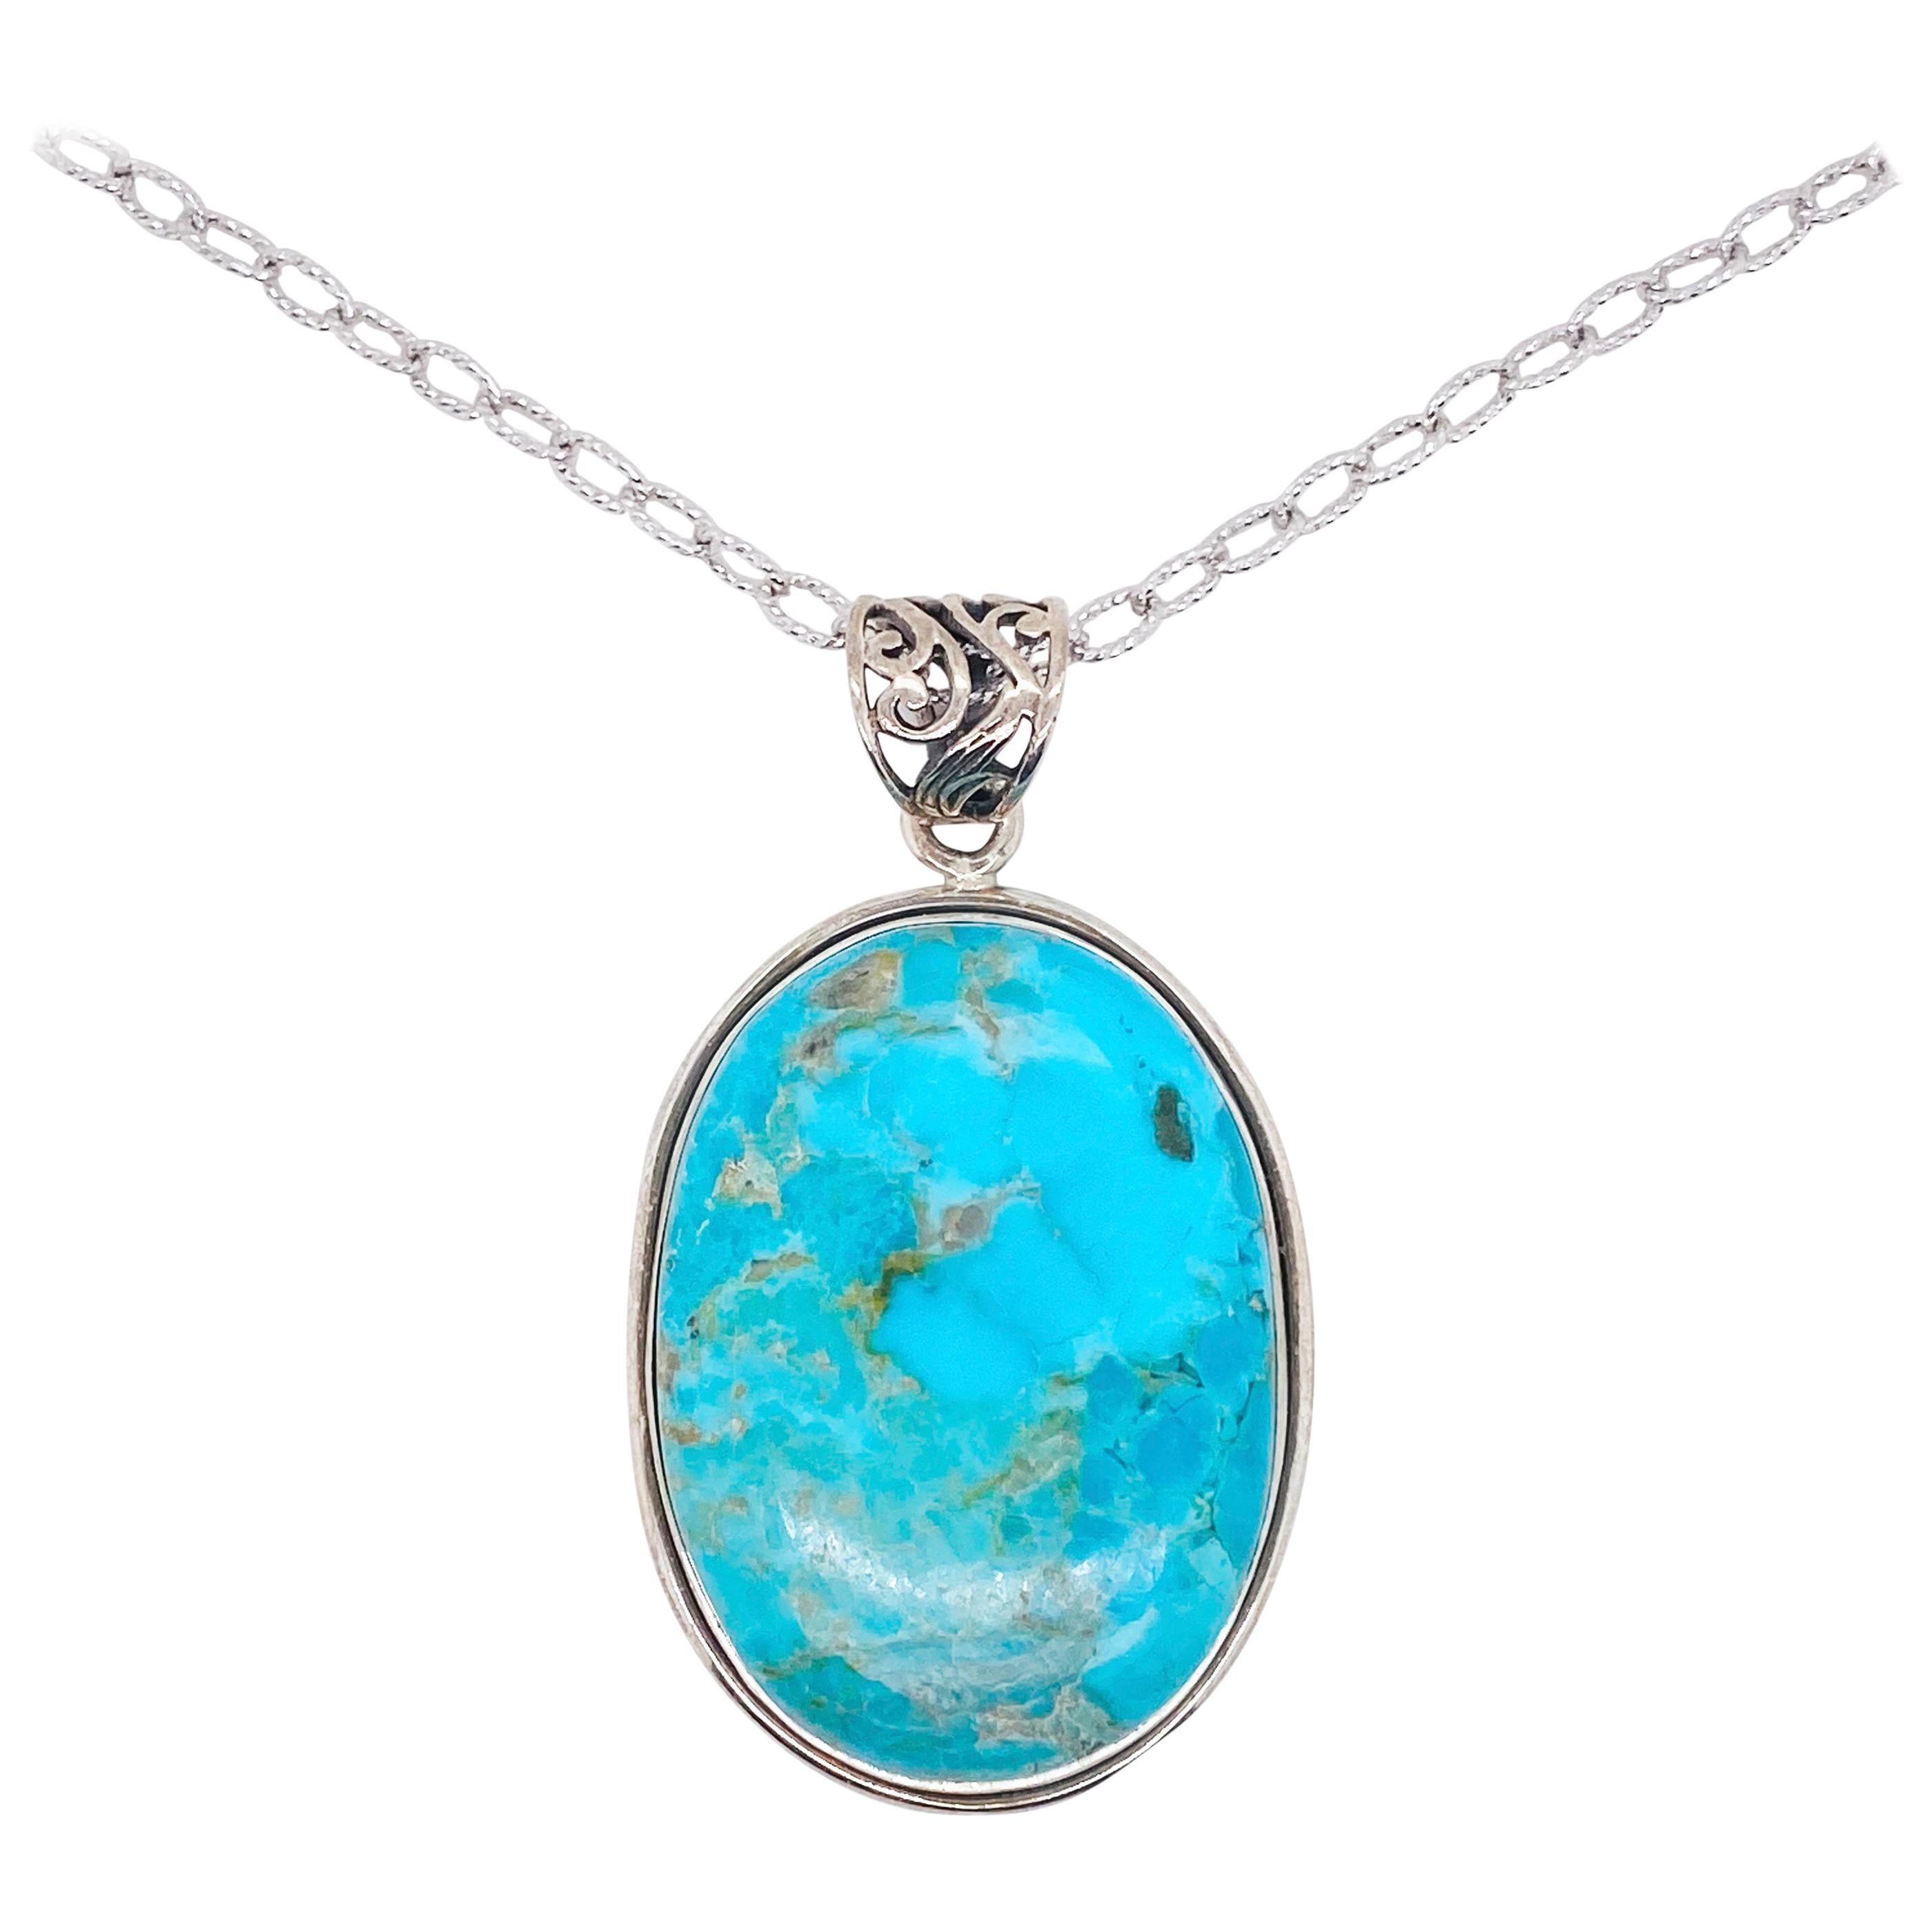 Southwestern Abstract Pendant with Large Bail Turquoise-like Natural Stone